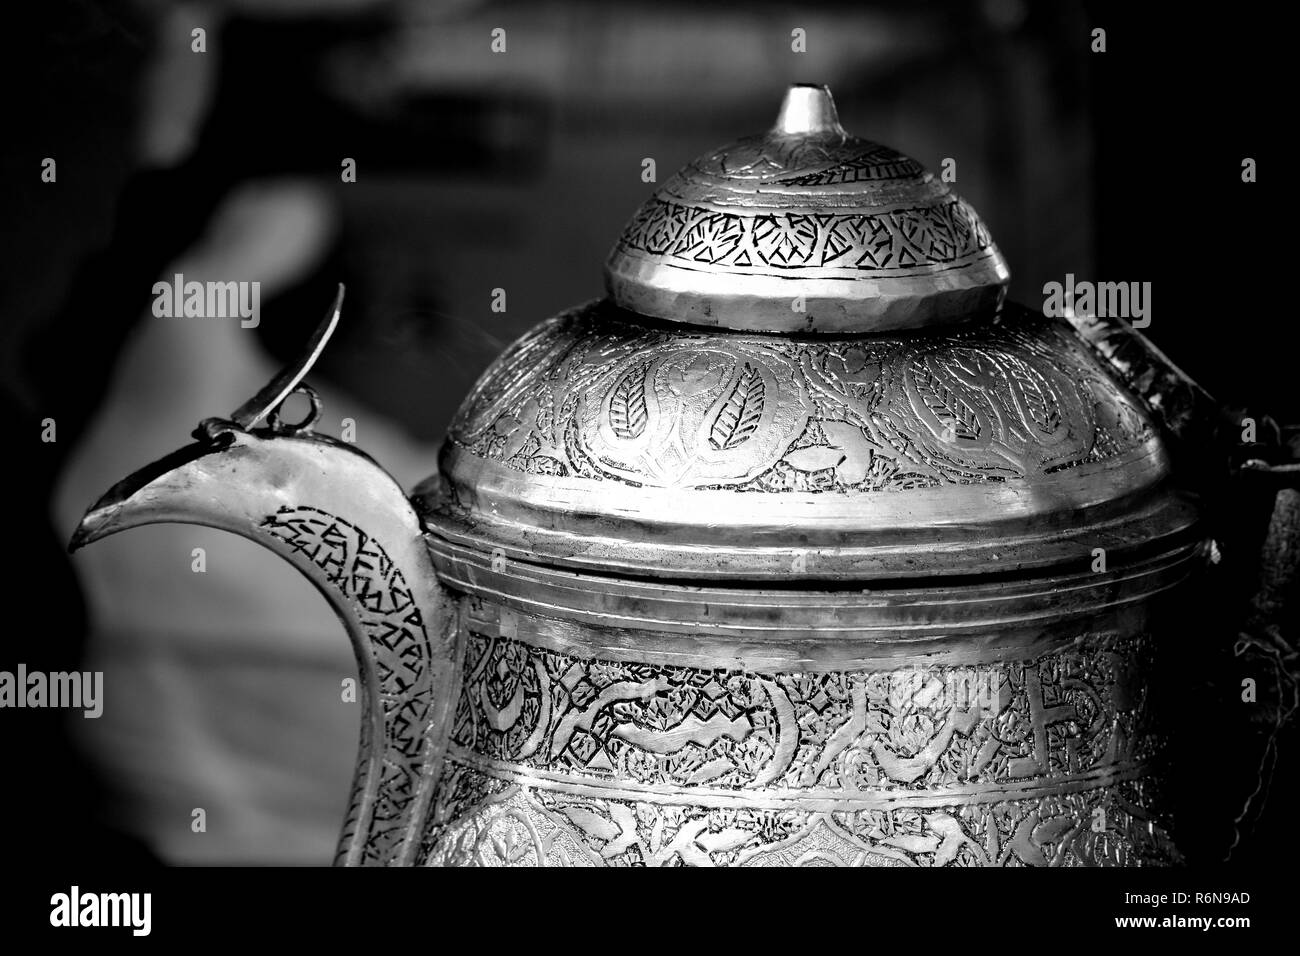 Close up of a silver Samovar (or traditional Kashmiri kettle) used to brew, boil and serve Kashmiri tea. Stock Photo